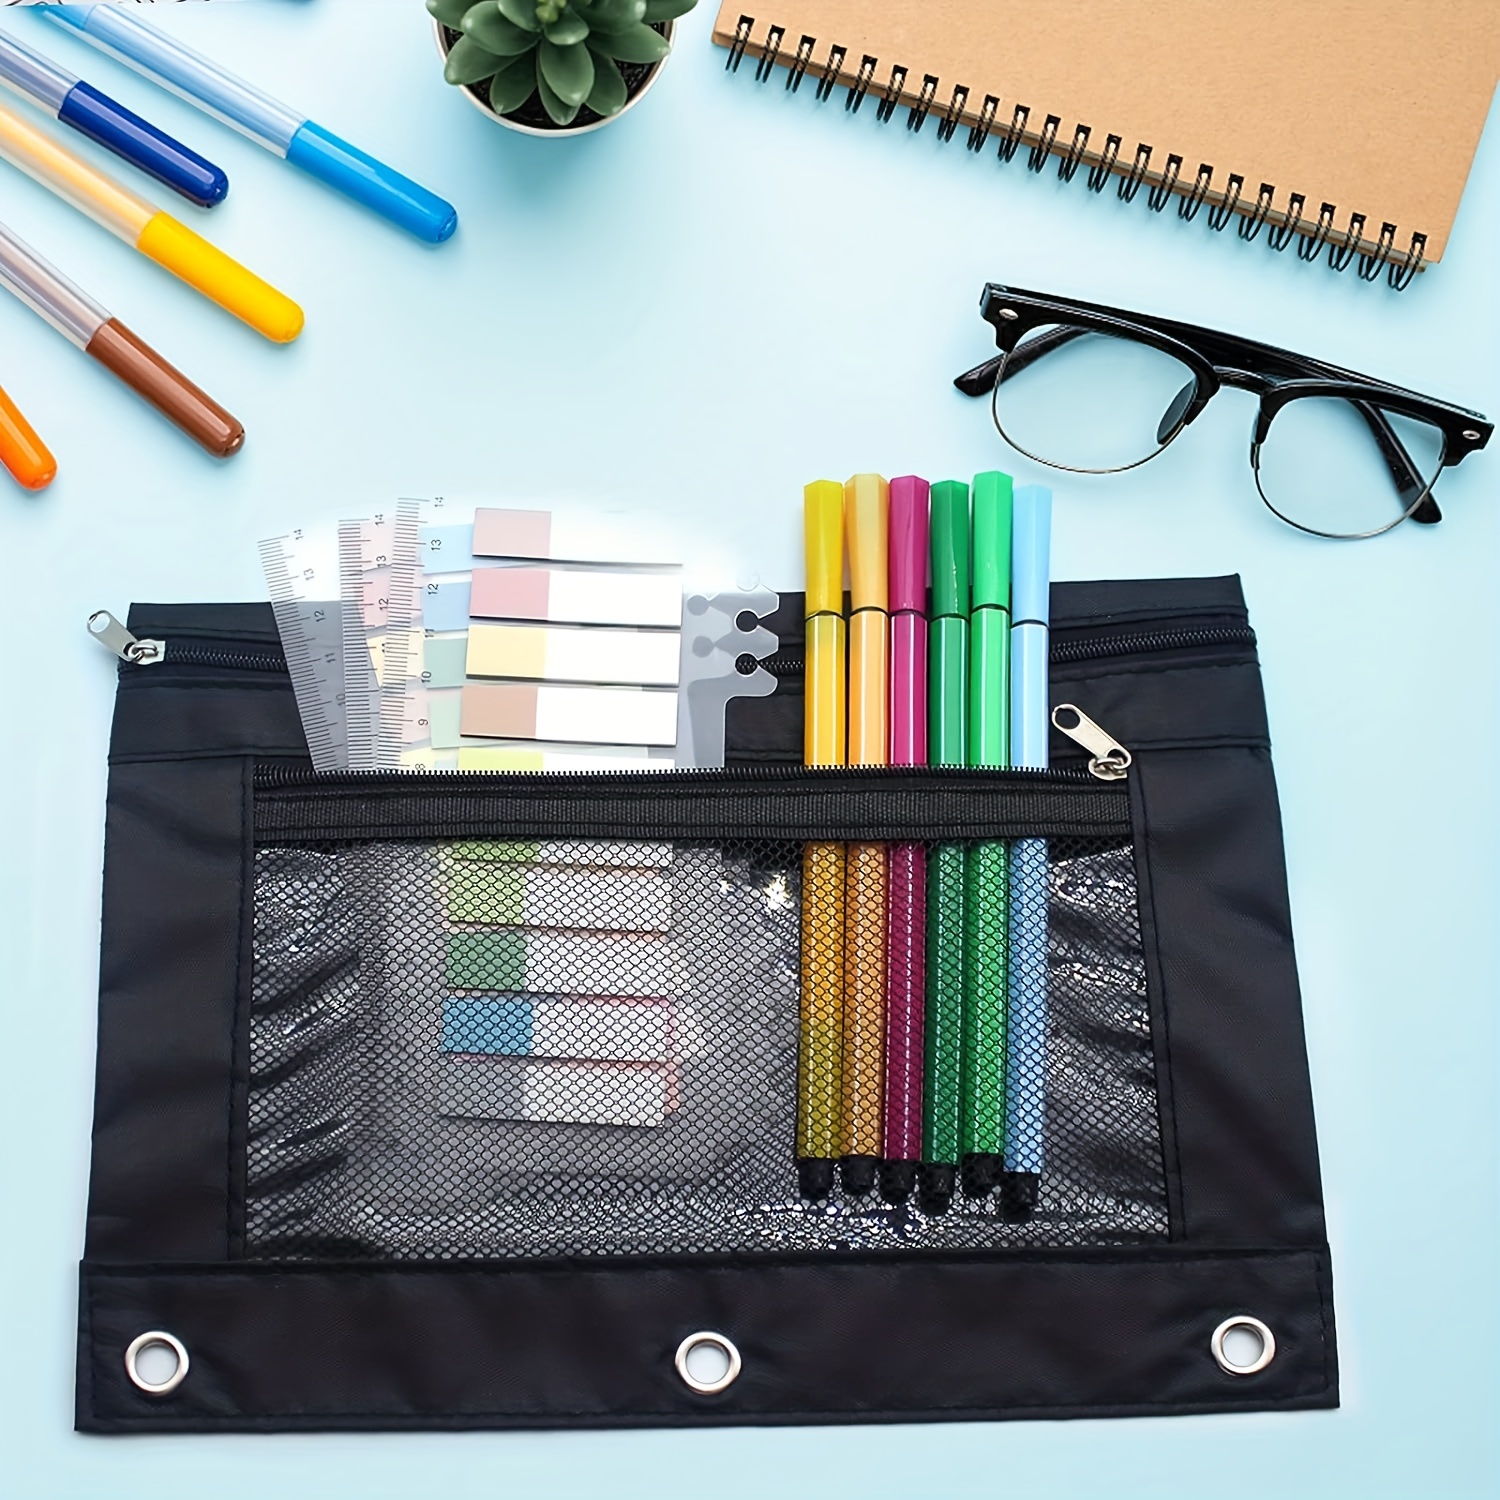 1 Pc Pencil Pouch For 3 Ring Binder Fabric Pencil Case Mesh Pencil